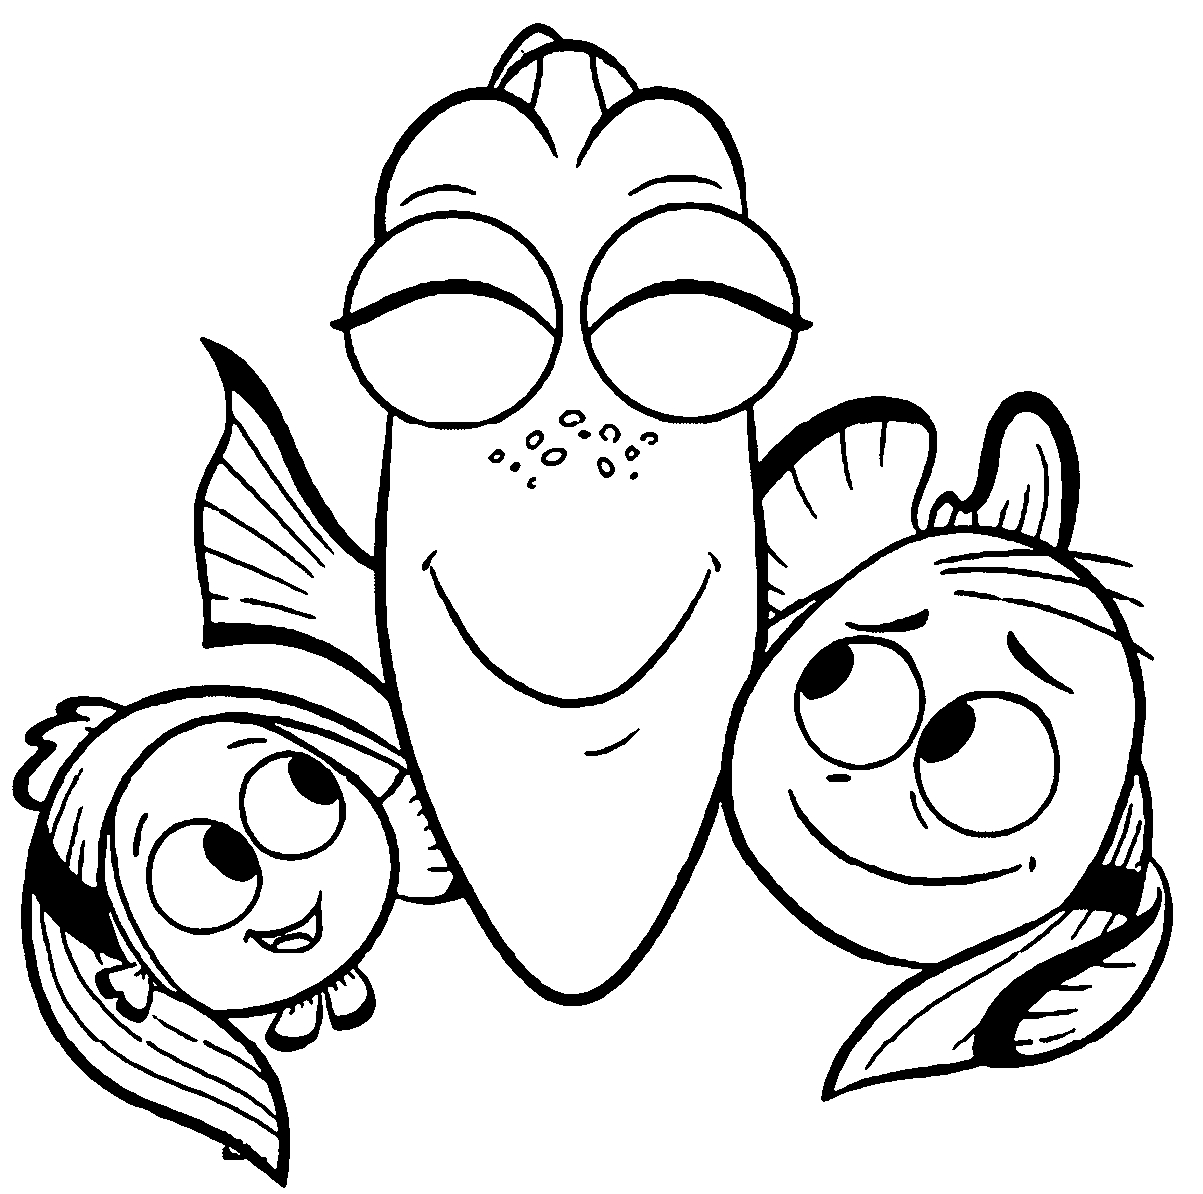 Dory Coloring Pages Best Coloring Pages For Kids HD Wallpapers Download Free Images Wallpaper [wallpaper896.blogspot.com]